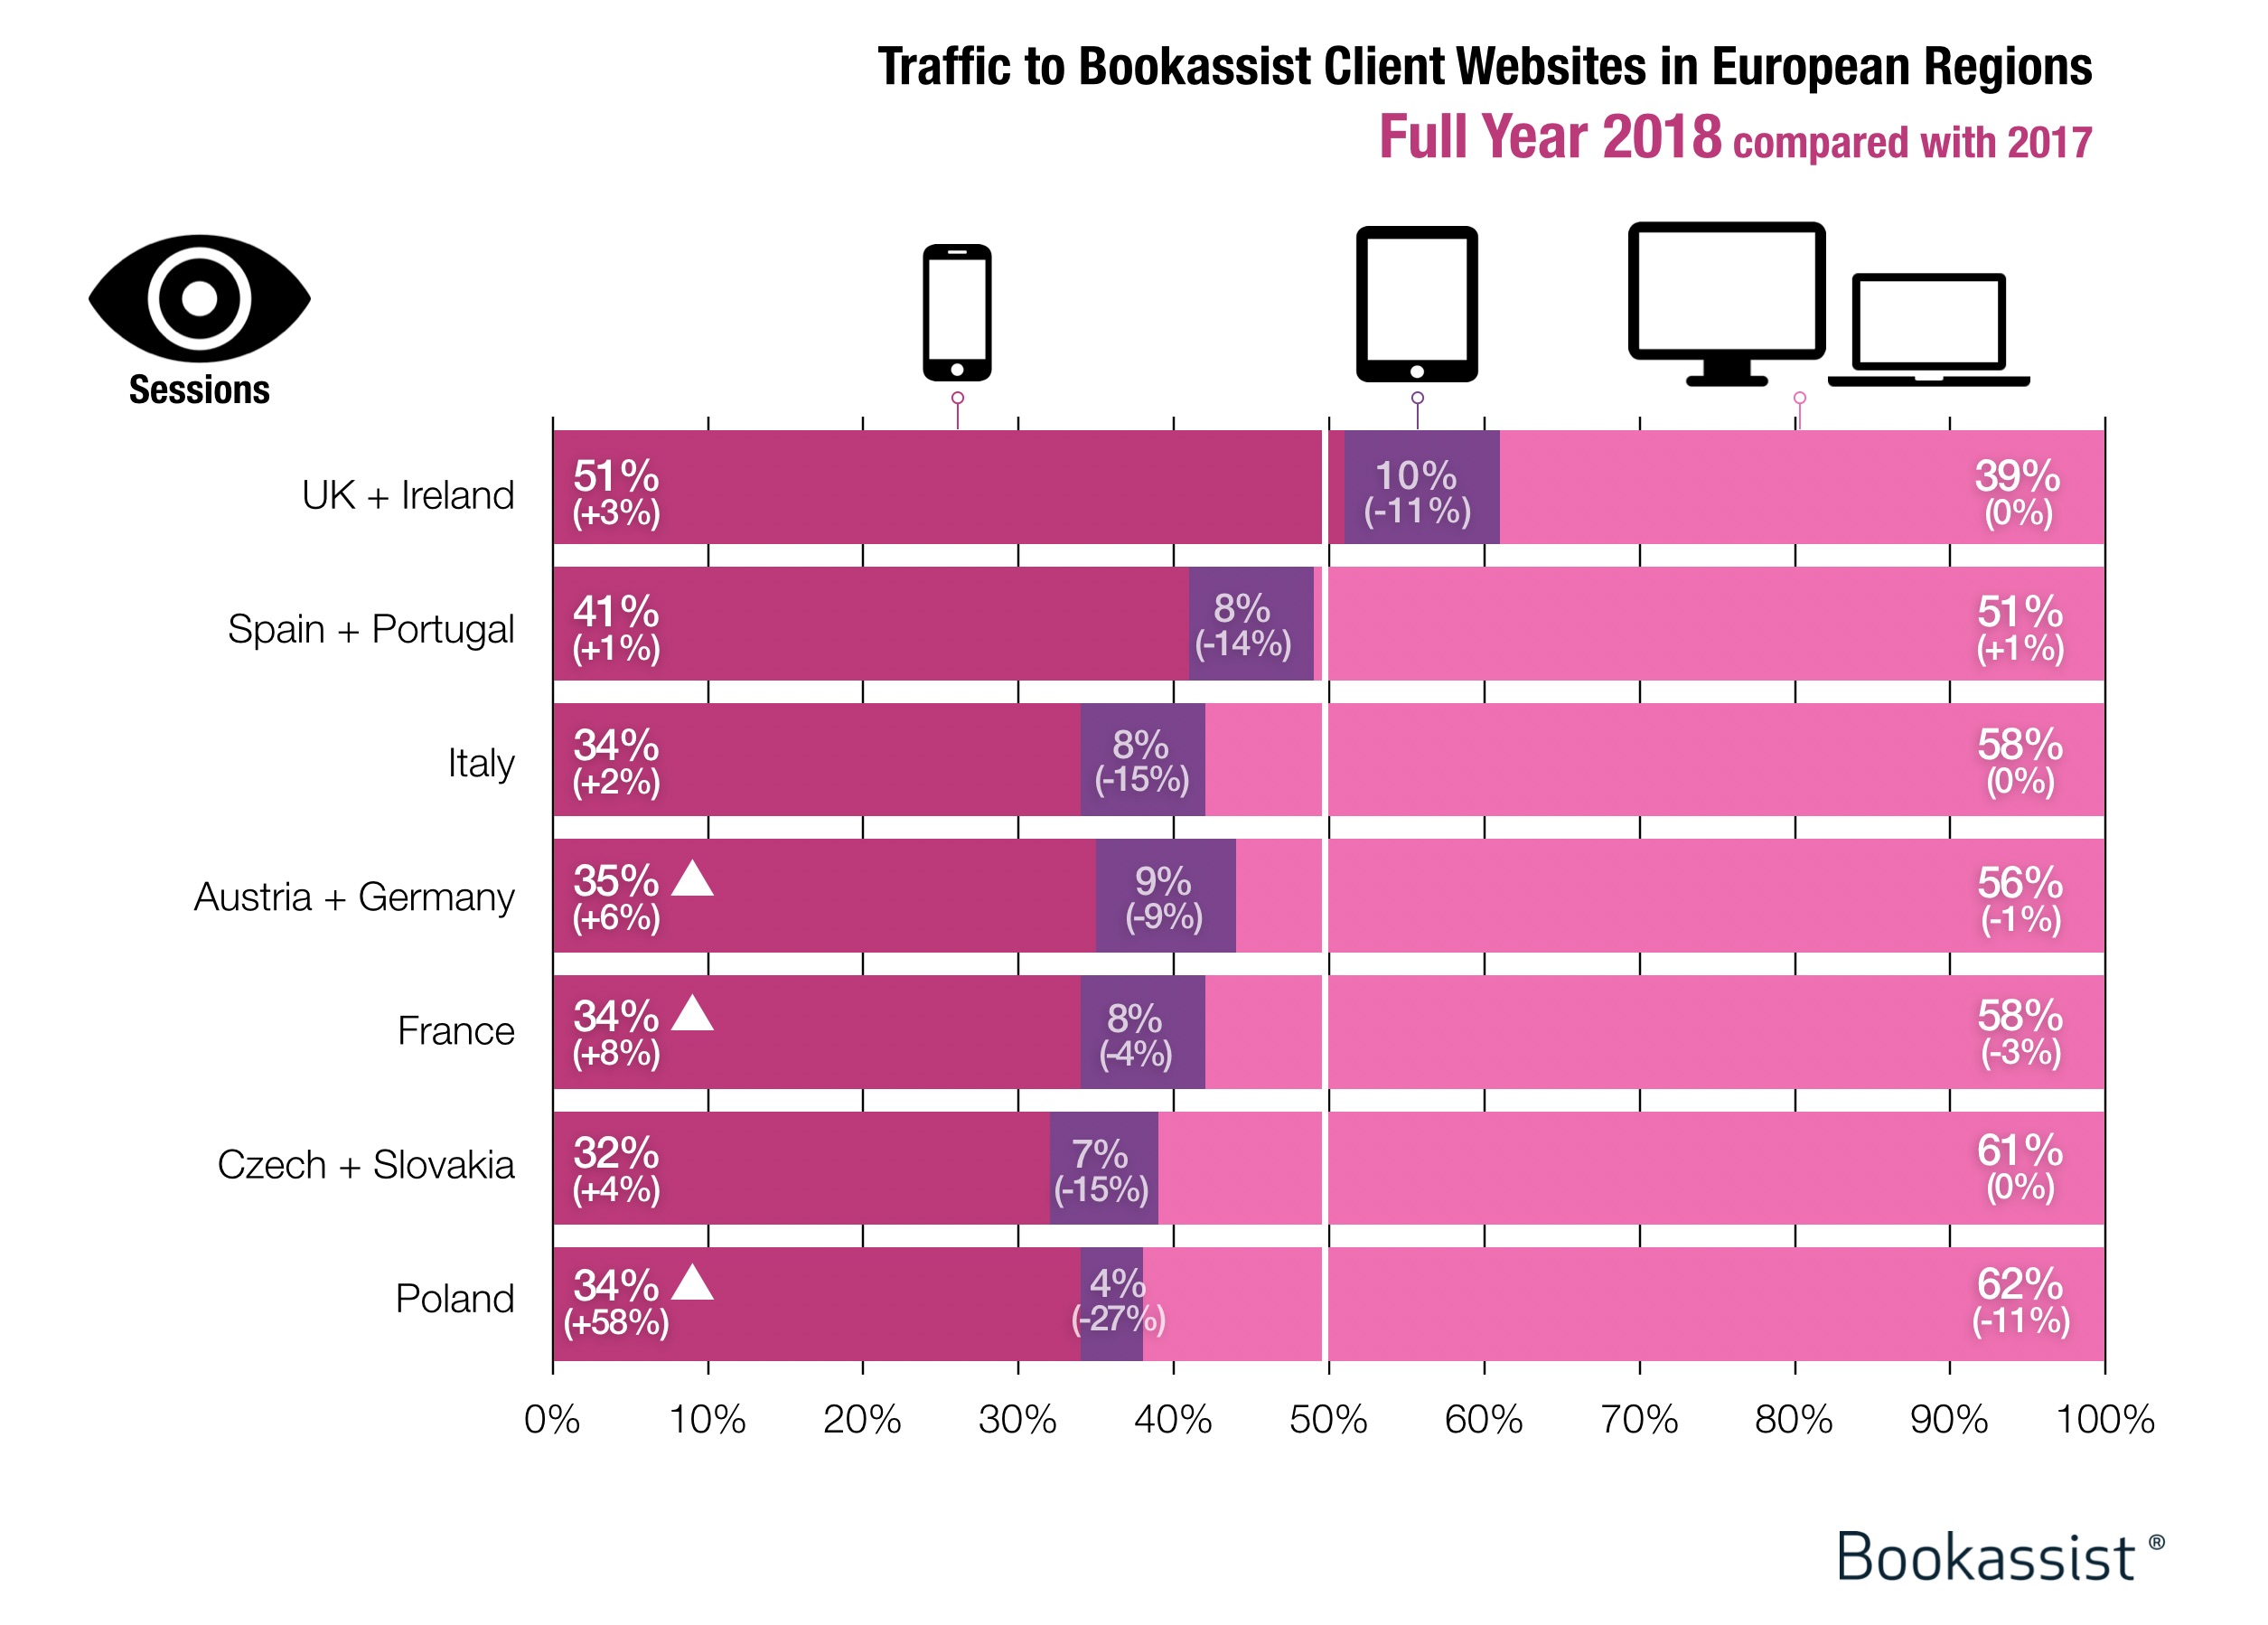 chart comparing Bookassist client's mobile and desktop traffic for 2017 and 2018